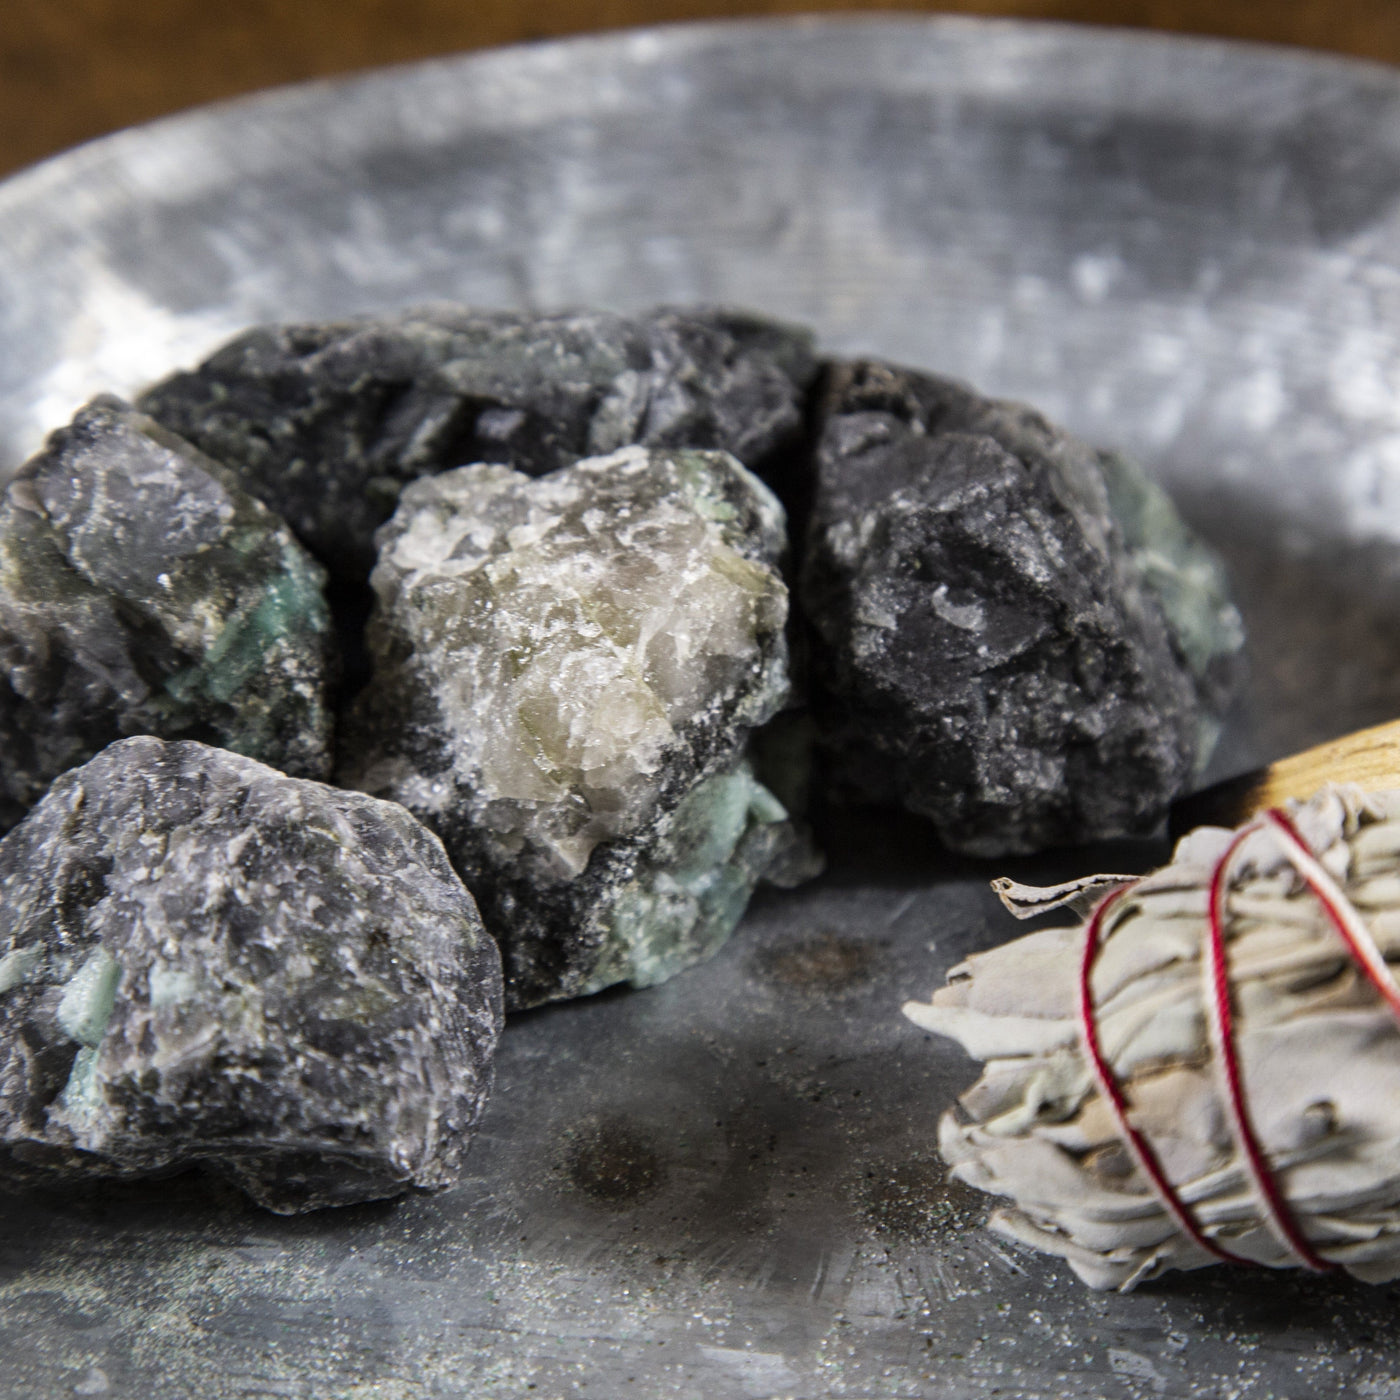 5 chunk of Emerald Rough Stones next to bundle of sage.